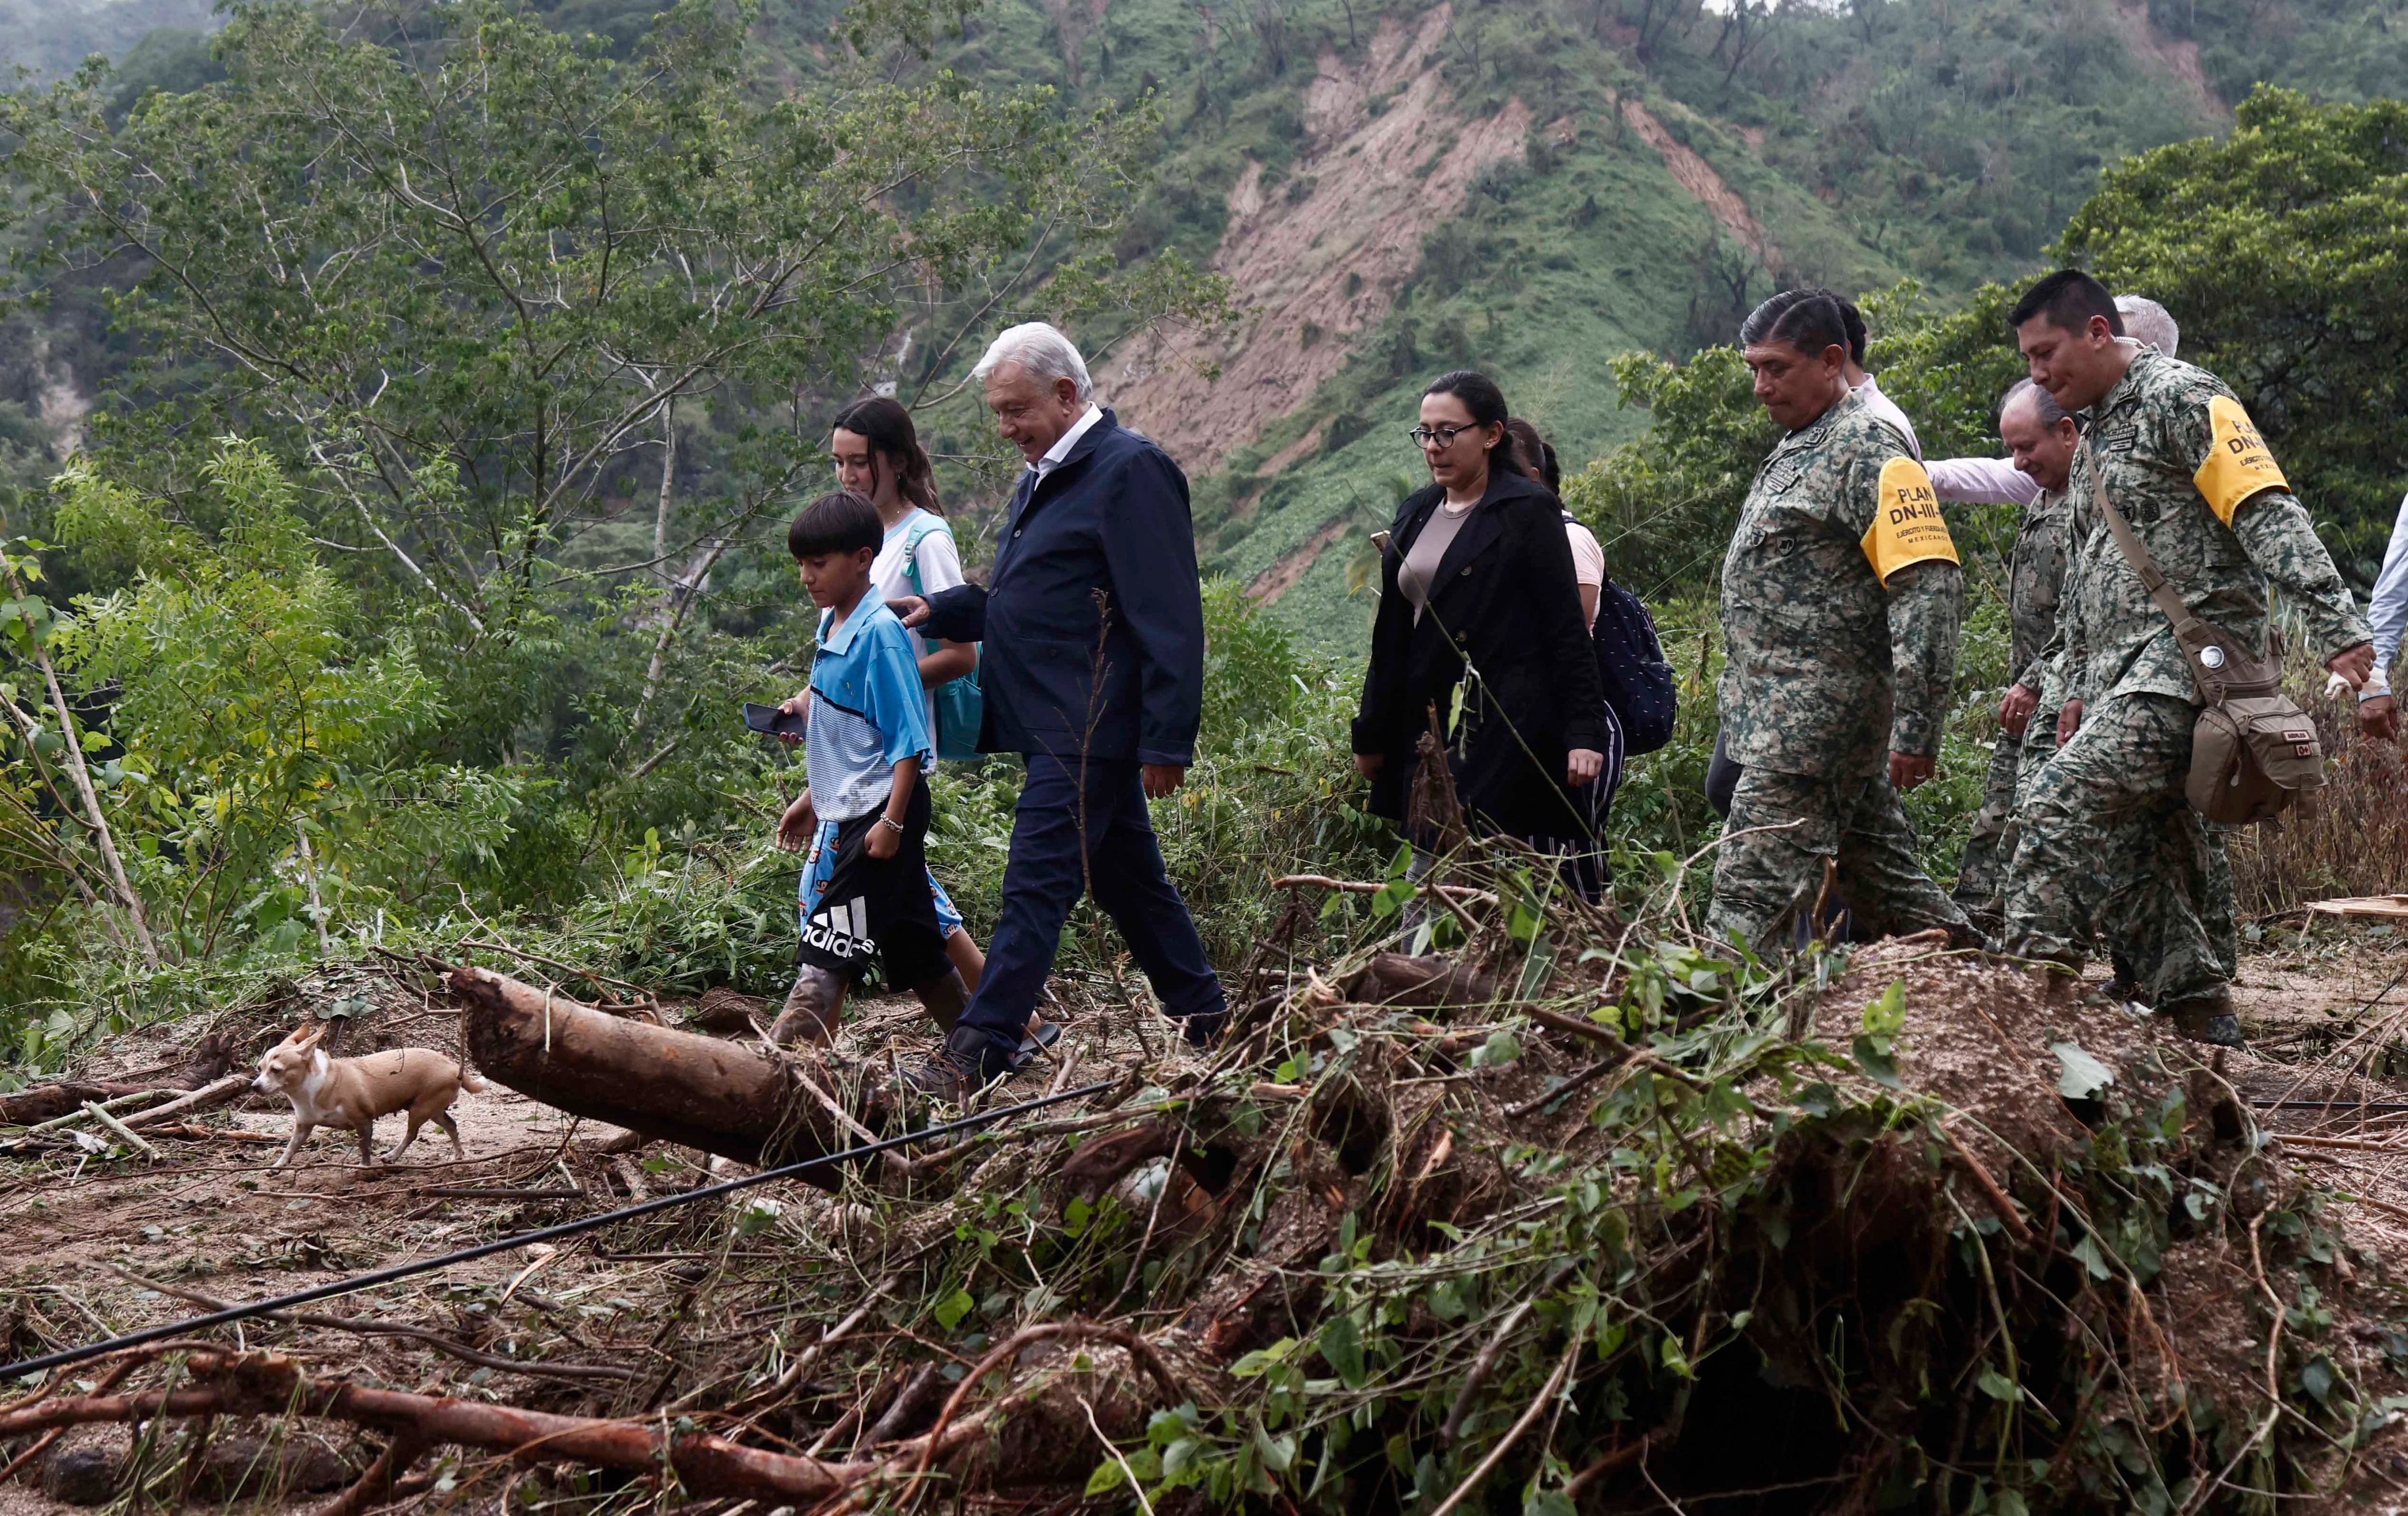 Mexican President Andres Manuel Lopez Obrador (C) and members of his cabinet visit the Kilometro 42 community, near Acapulco, Guerrero State, Mexico, after the passage of Hurricane Otis, on October 25, 2023. Mexican authorities rushed to send emergency aid, restore communications and assess damage in the Pacific beach resort of Acapulco on Wednesday after a powerful hurricane left a trail of destruction and tourists stranded. (Photo by Rodrigo OROPEZA / AFP)